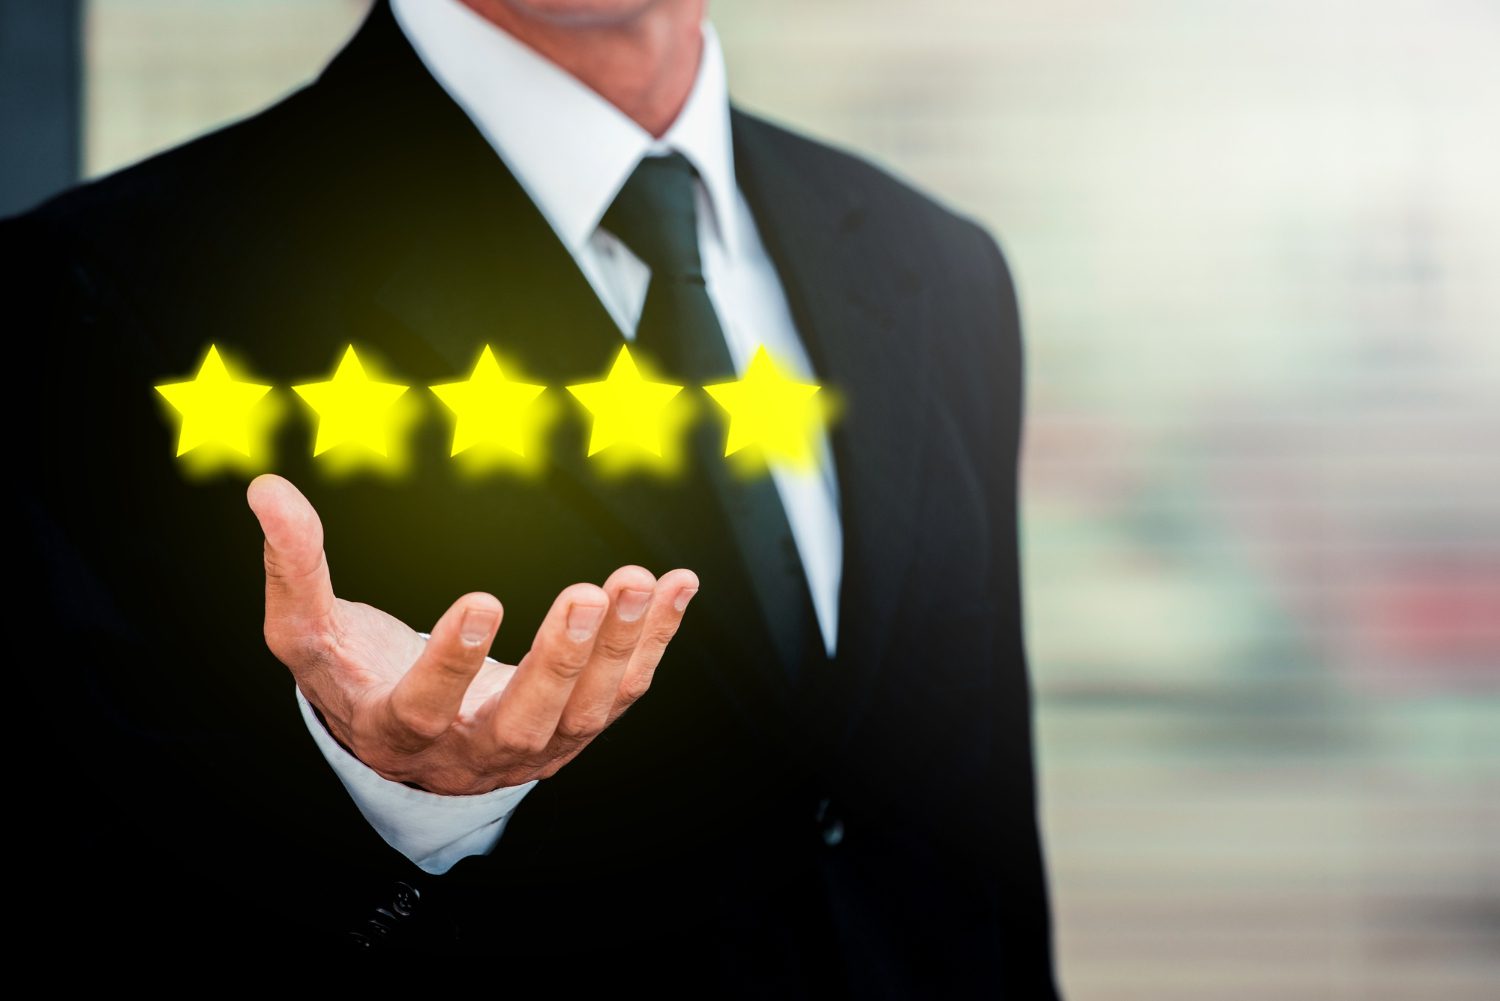 A man holds out his hand with glowing stars floating above it, representing a five-star rating